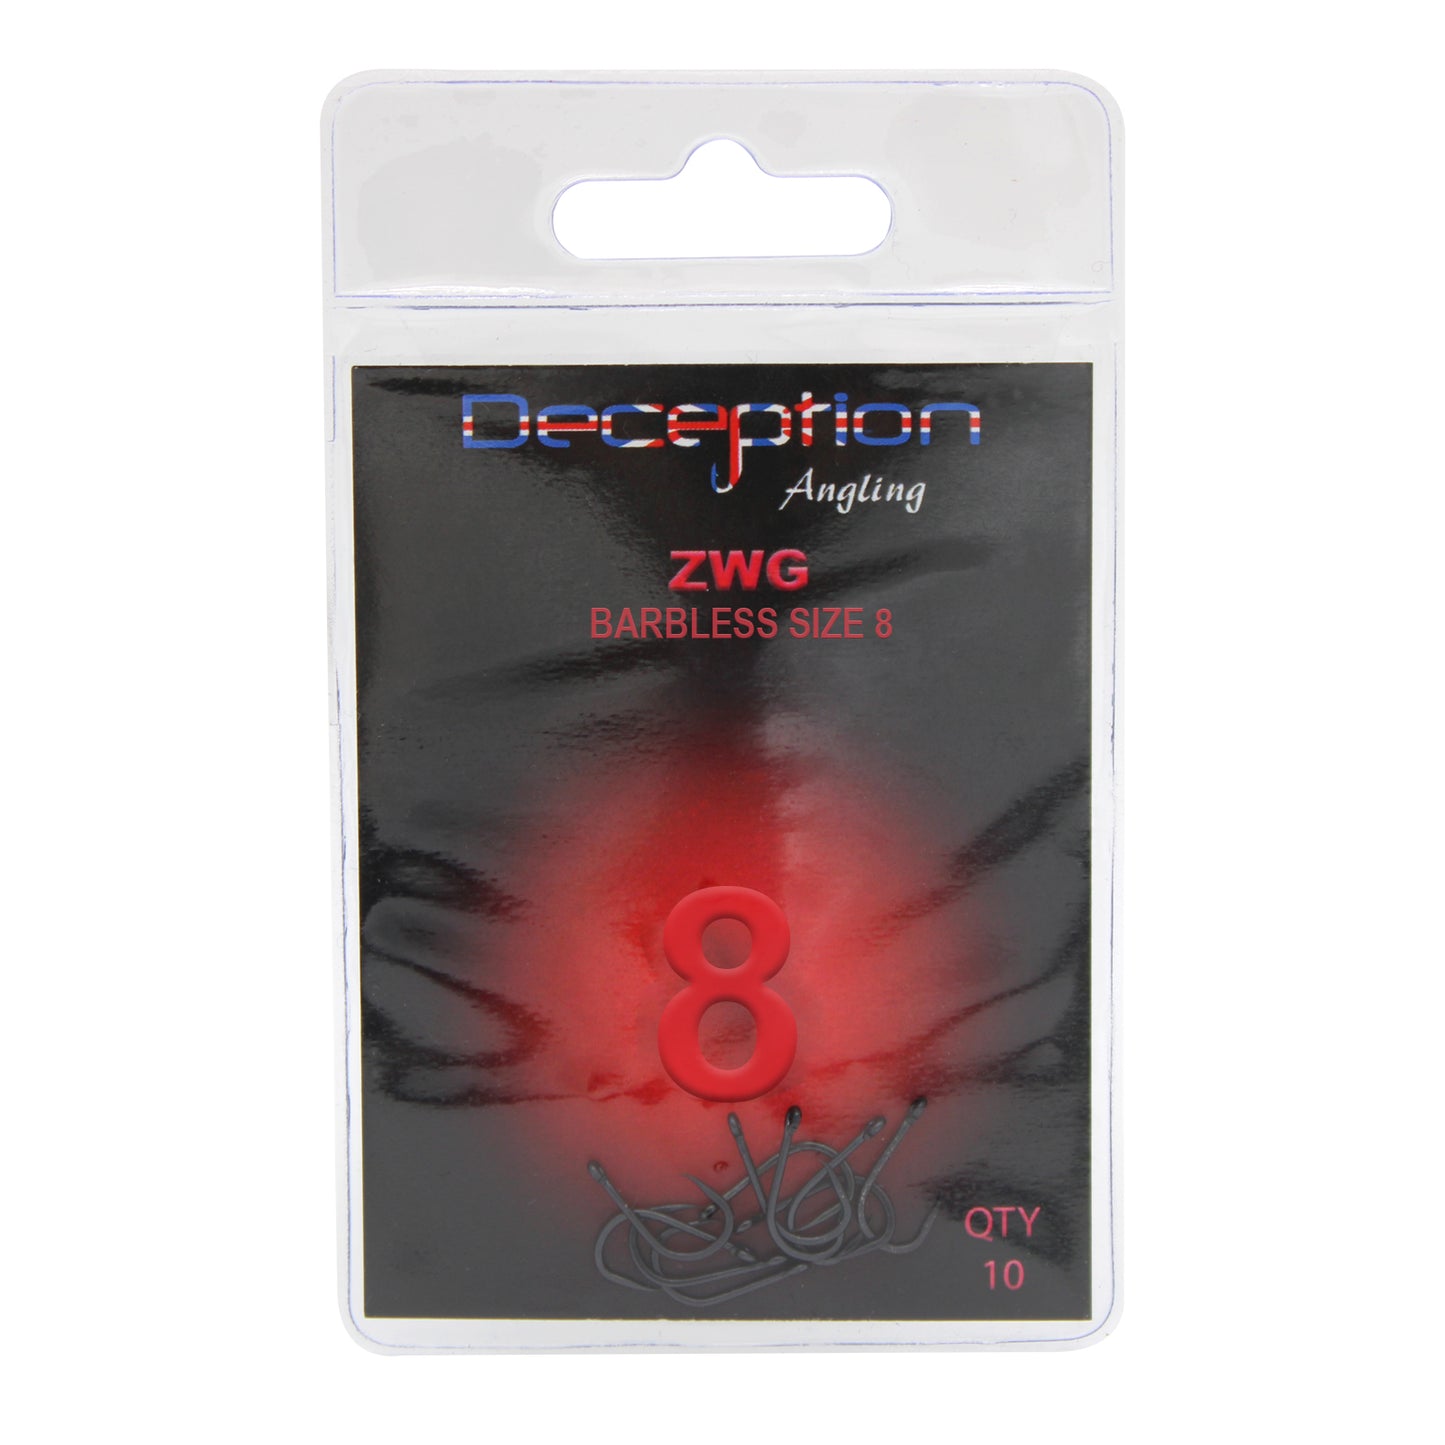 Deception Angling ZWG Barbless Fishing Hooks Size 8 Pack of 10